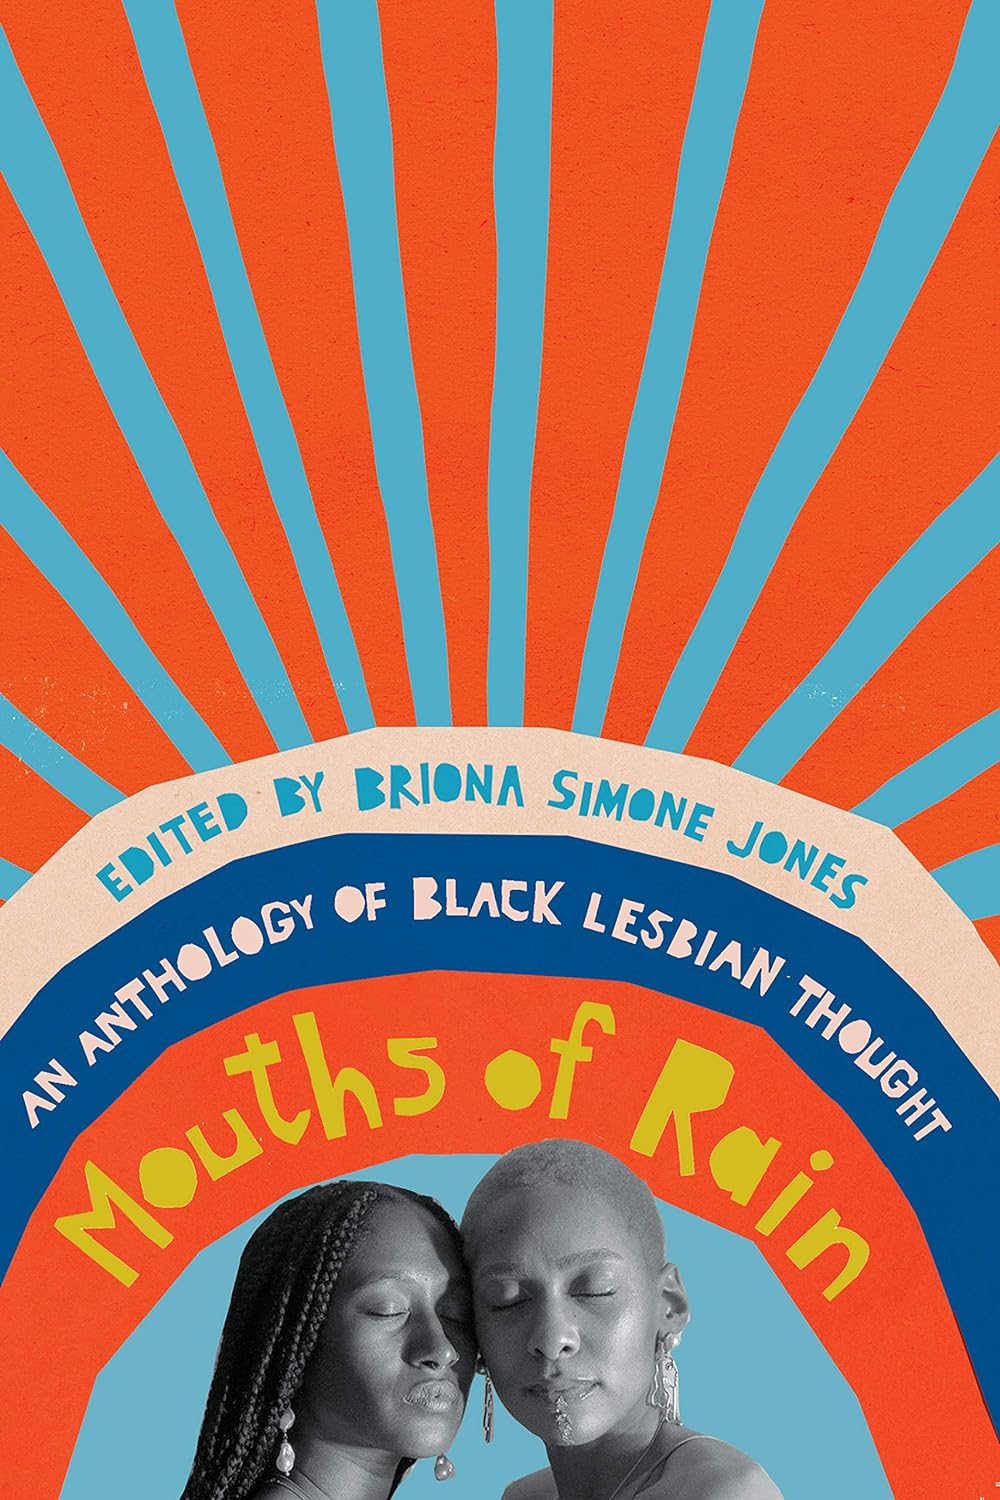 Mouths Of Rain: An Anthology Of Black Lesbian Thought by Briona Simone Jones (ed.)